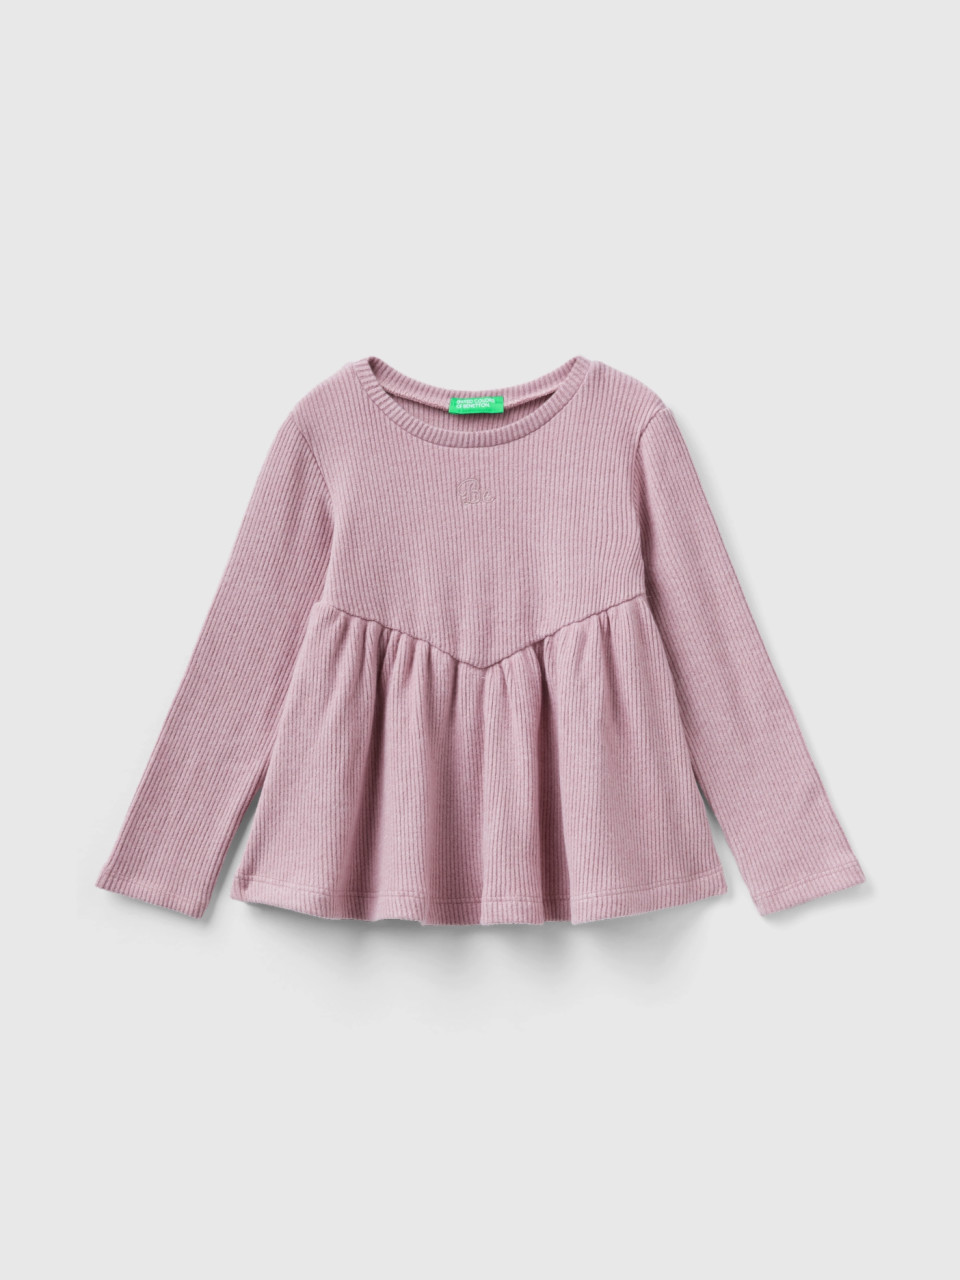 Benetton, Warm Ribbed T-shirt With Rouching, Pink, Kids